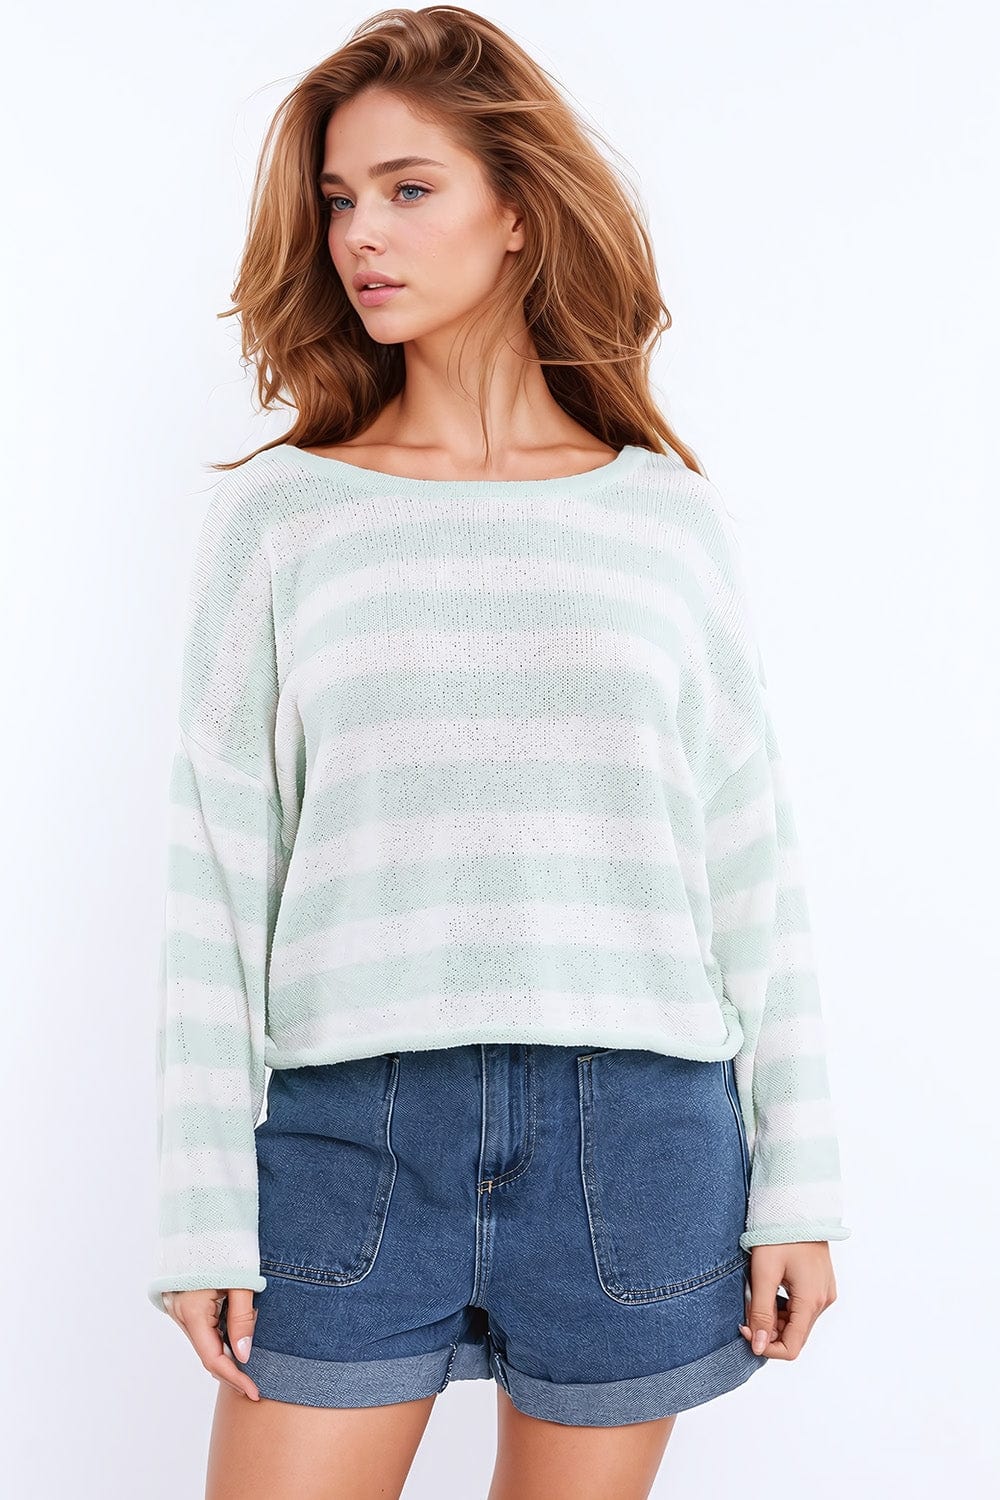 Q2 Women's Sweater Striped Sweater With Knot Detail At The Back